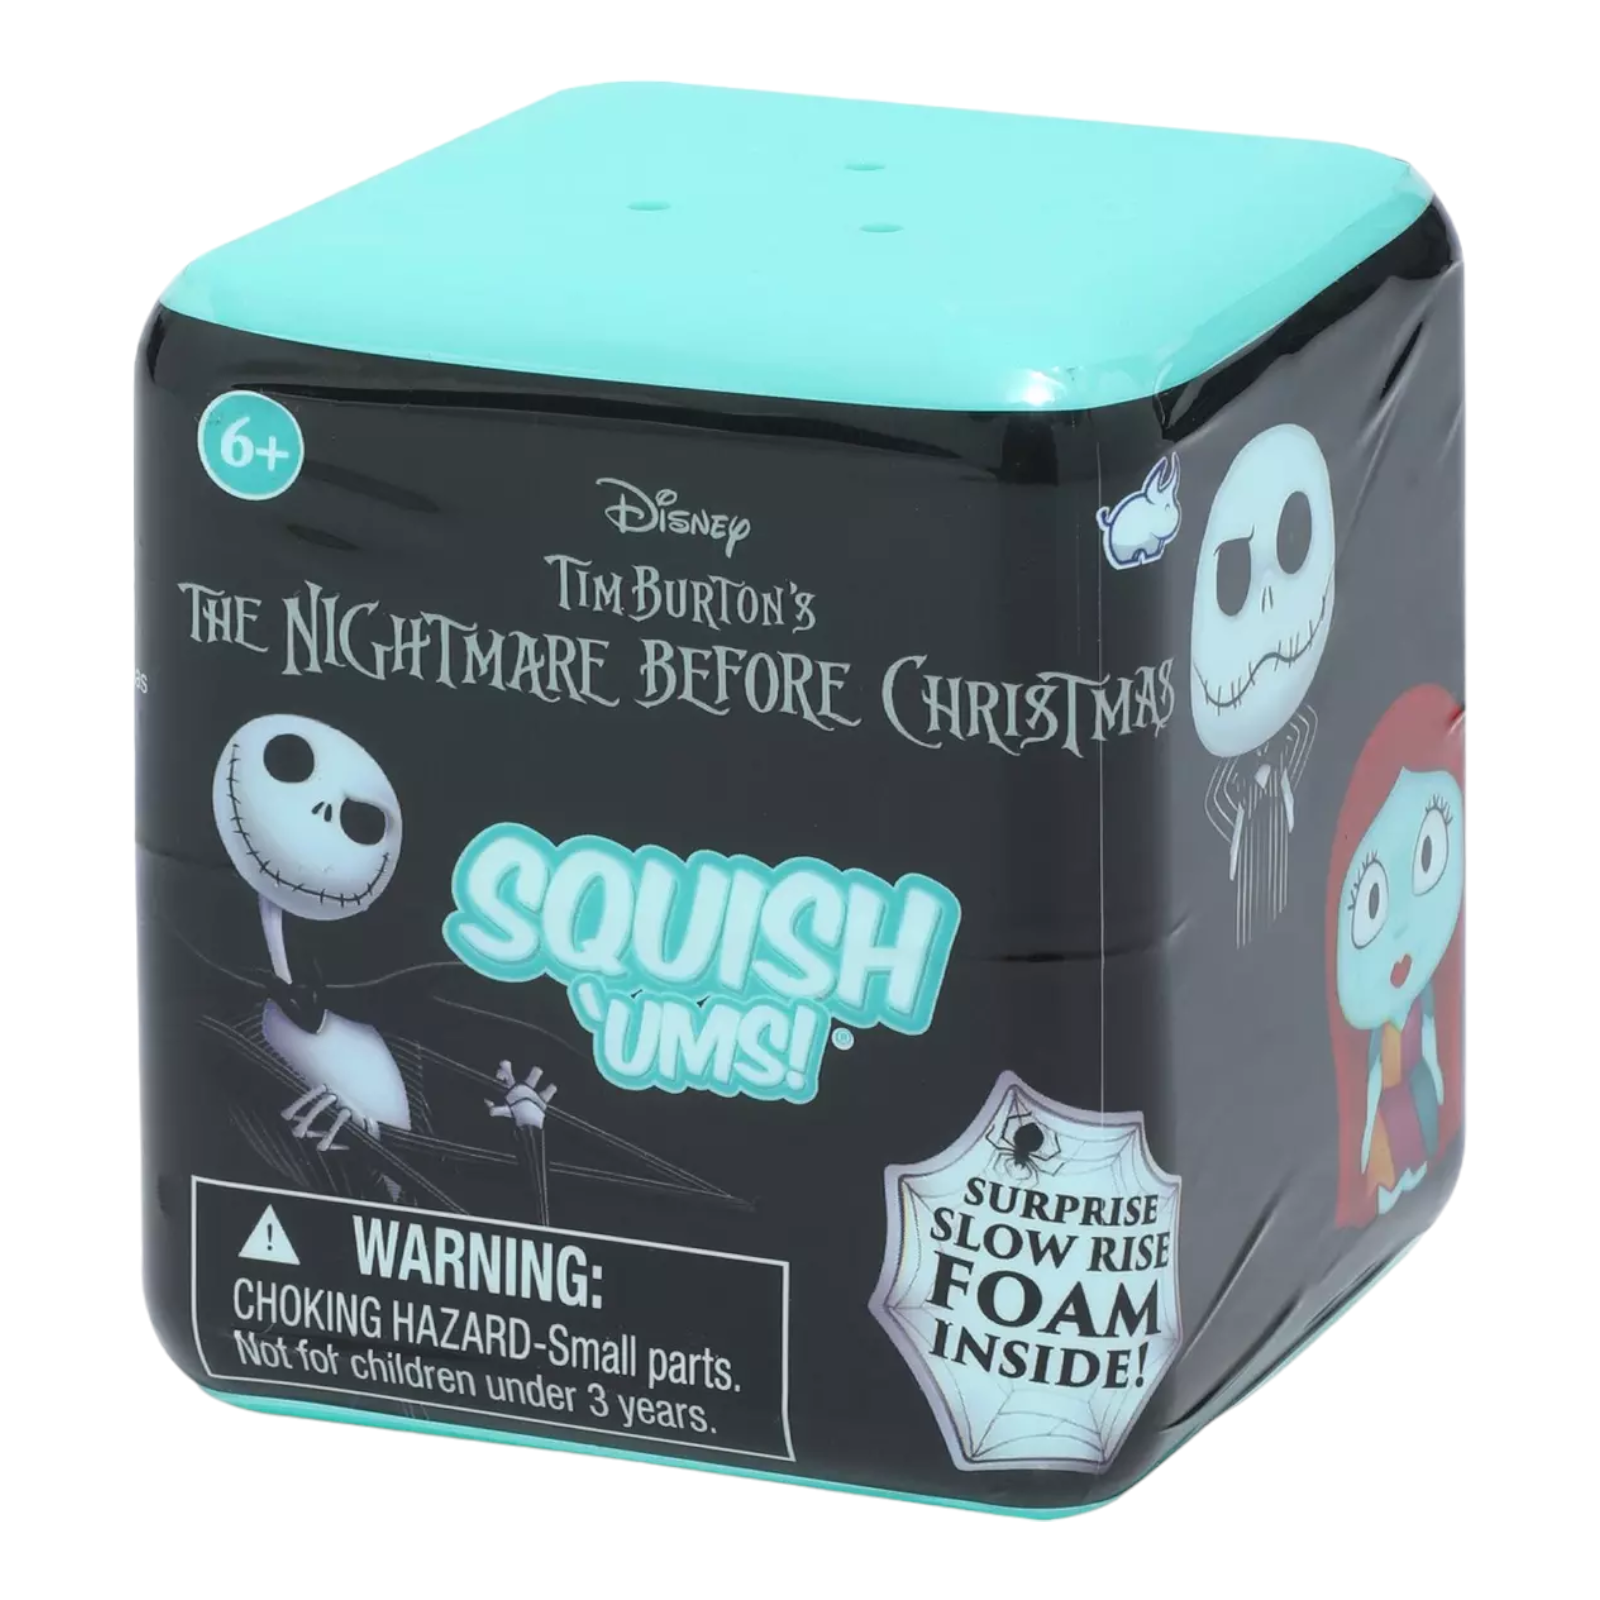 Squish 'Ums! The Nightmare Before Christmas Character Blind Box Figure